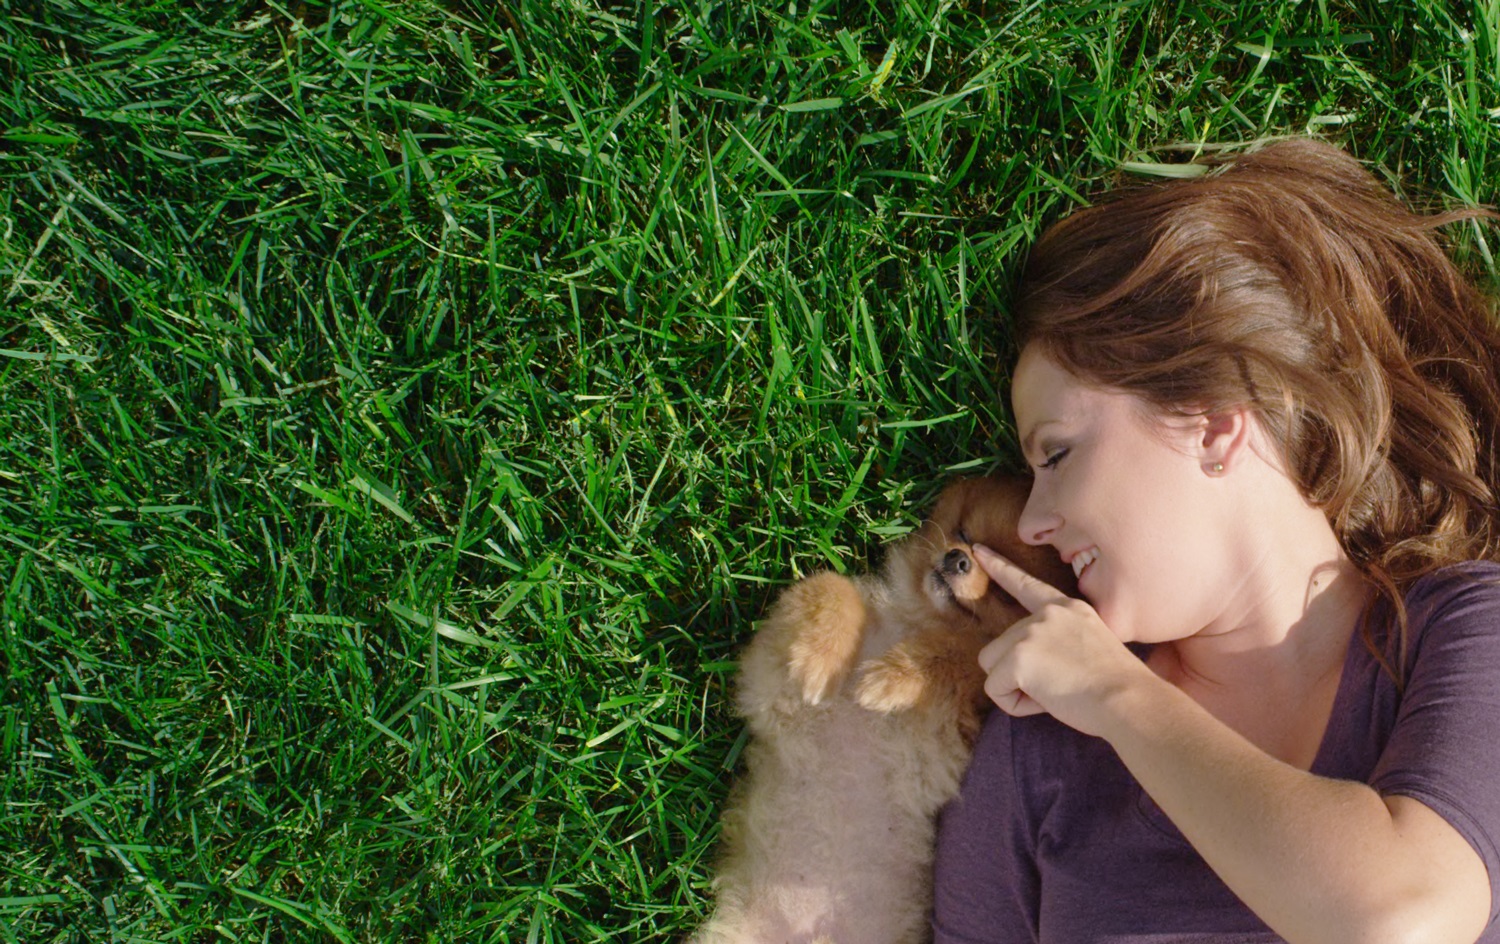 Pretty Woman playing with cute puppy on manicured green grass showing lawn care in Rockwall